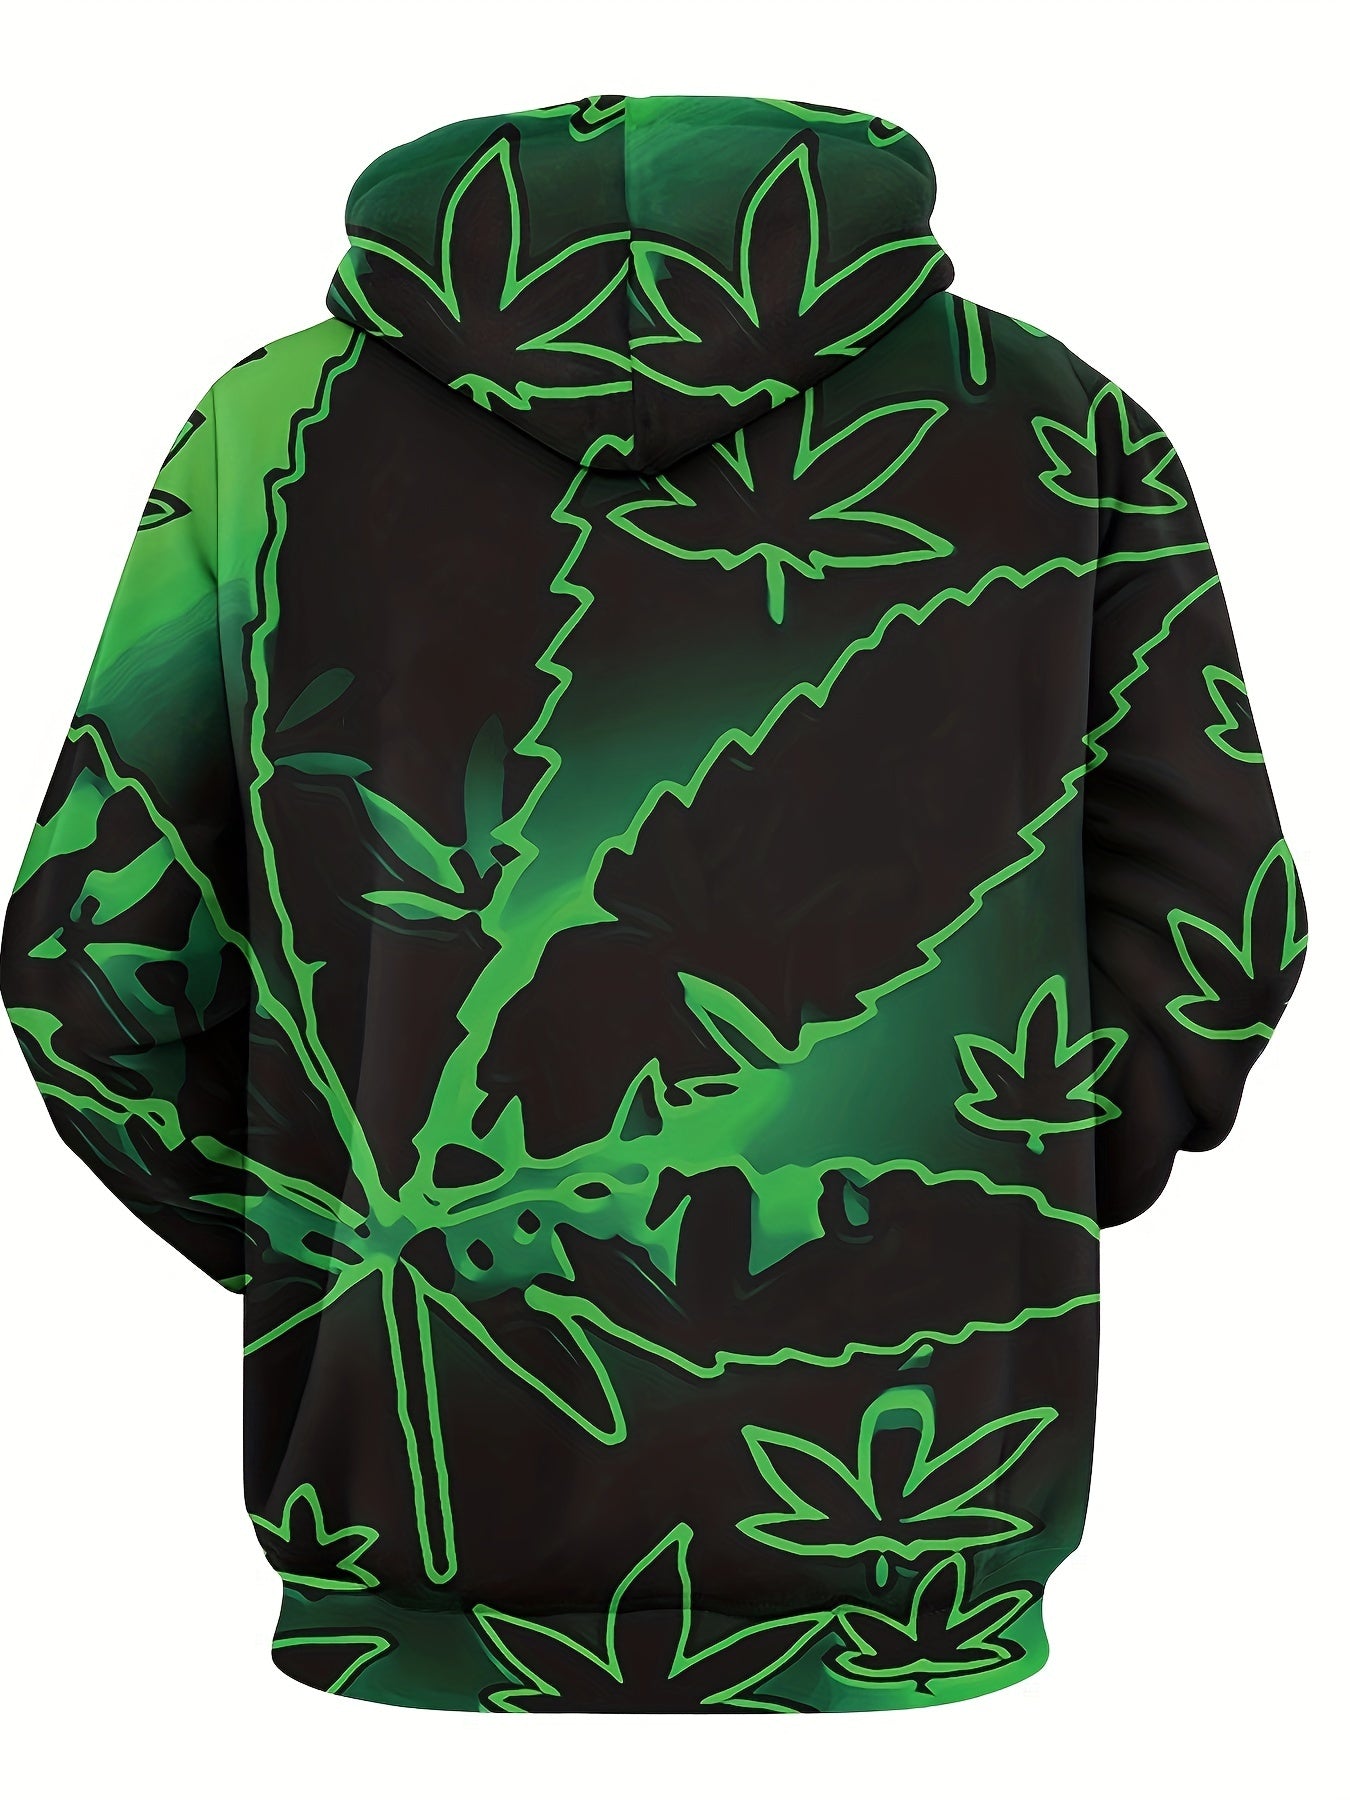 Leaf Pattern Print Hoodie, Cool Hoodies For Men, Men's Casual Graphic Design Pullover Hooded Sweatshirt Streetwear For Winter Fall, As Gifts